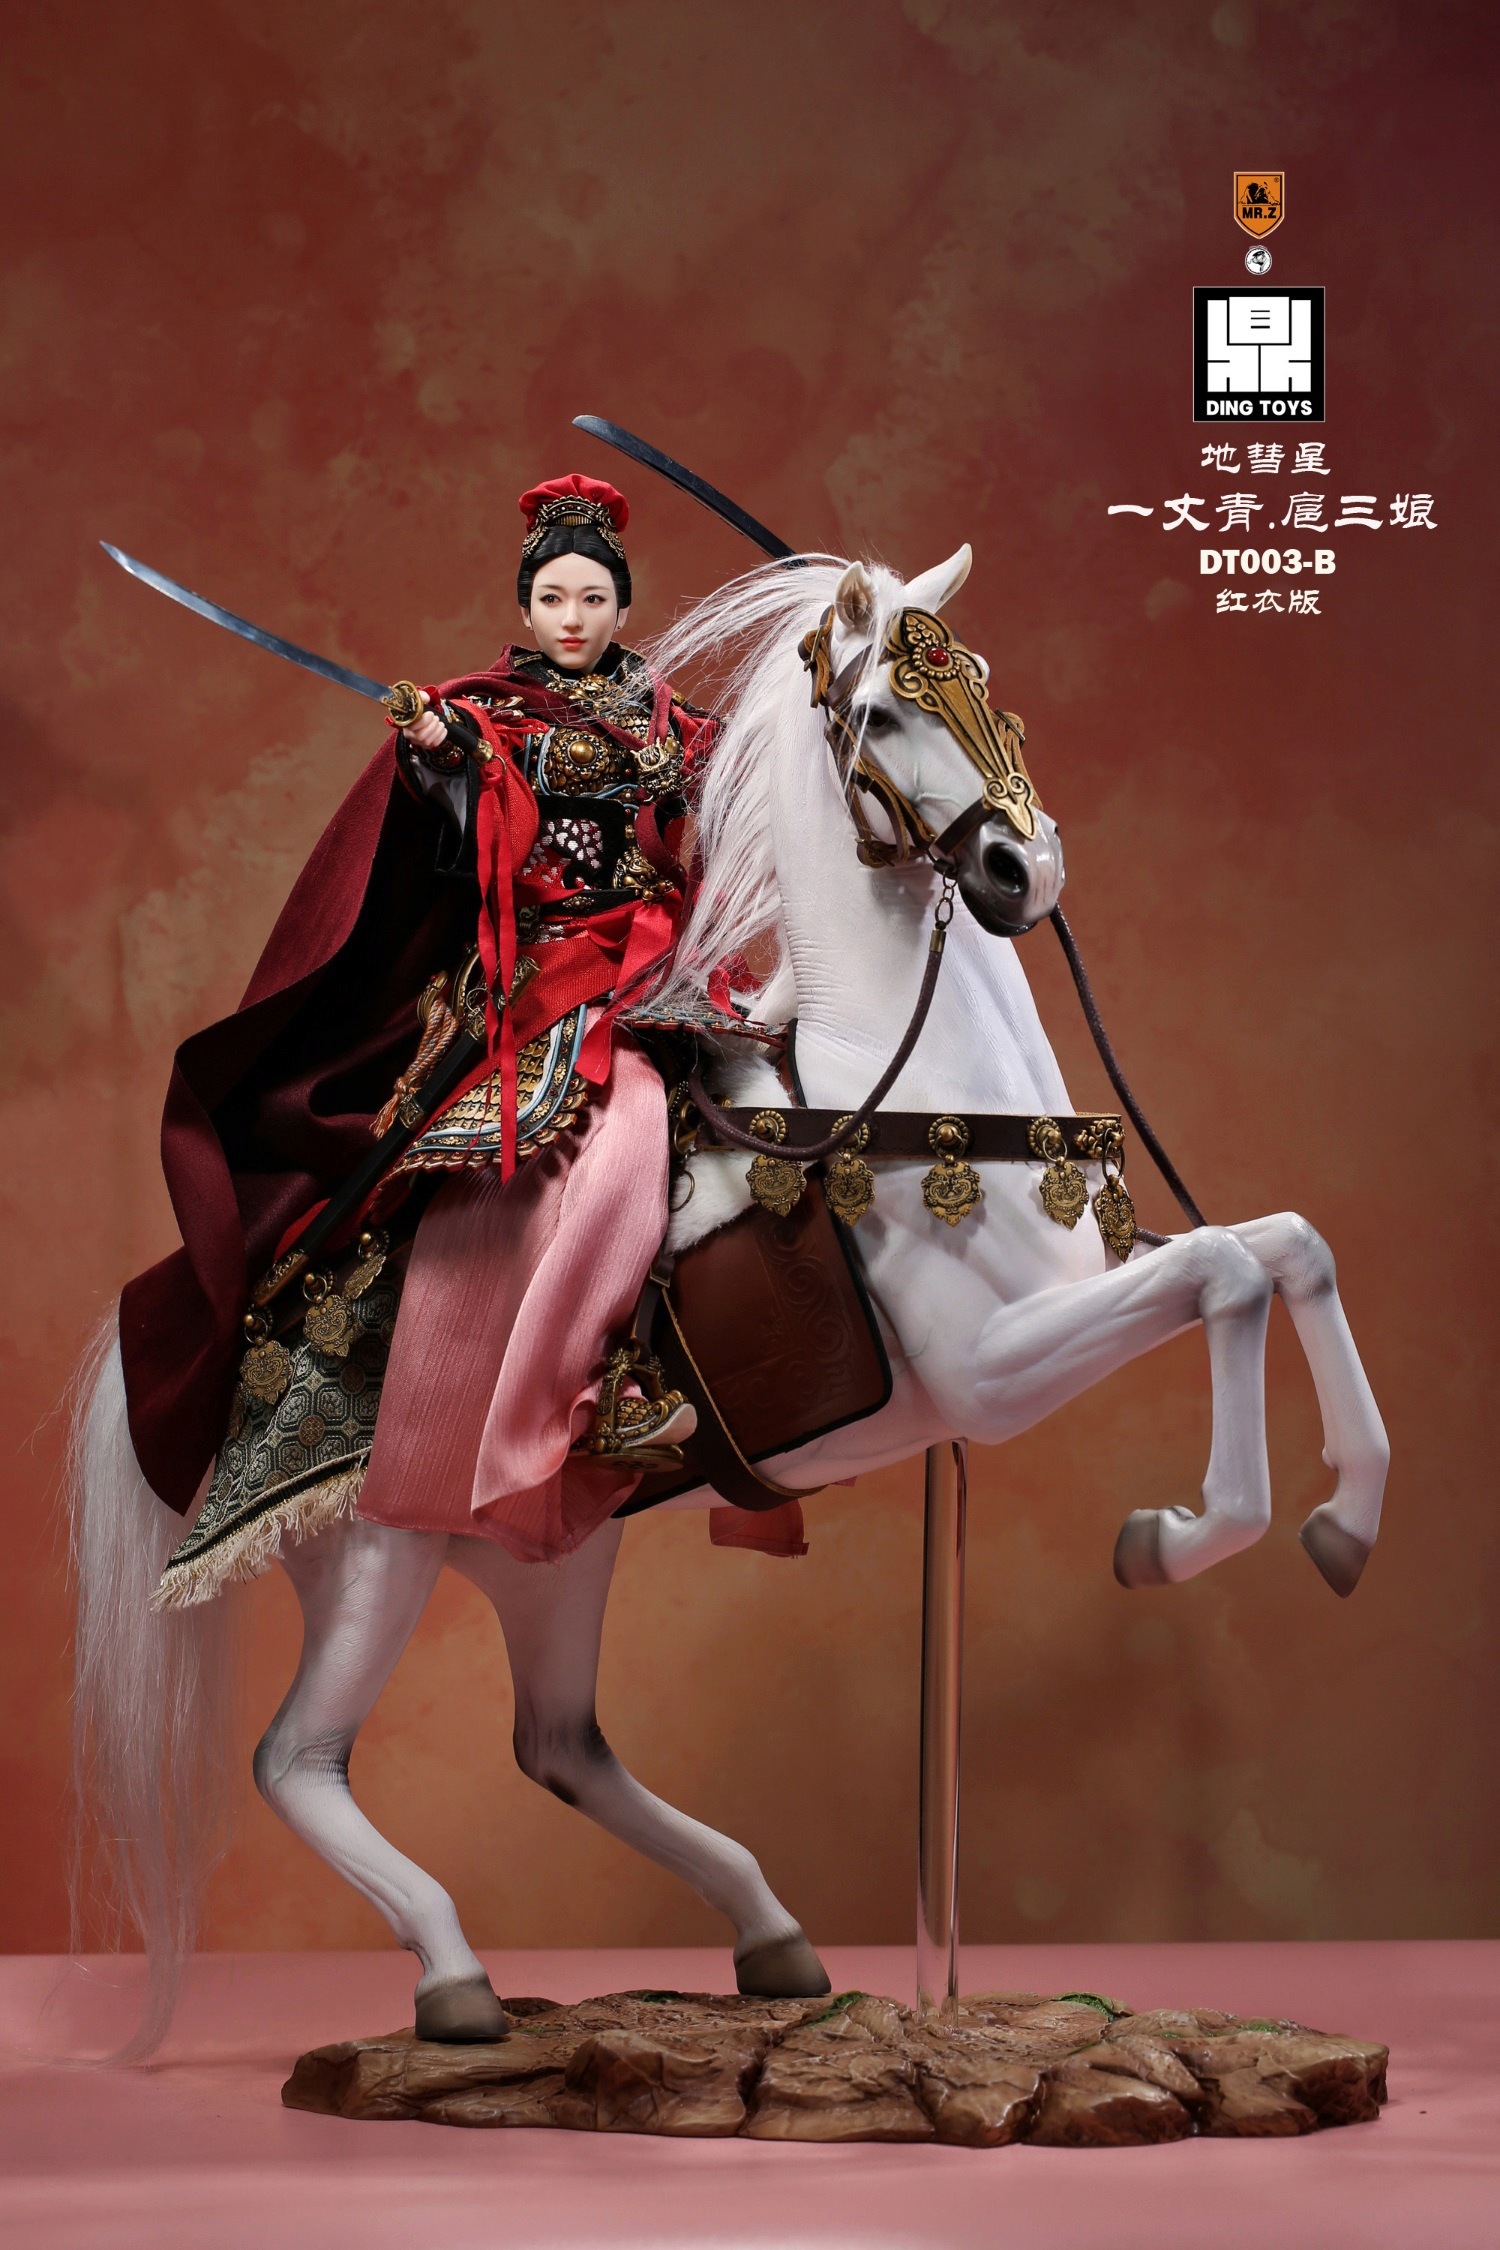 NEW PRODUCT: Mr.Z x Ding Toys DT003 1/6 Scale 《Water Margin》Shiying Zhang (Green and Red versions), Horse (White) 4321